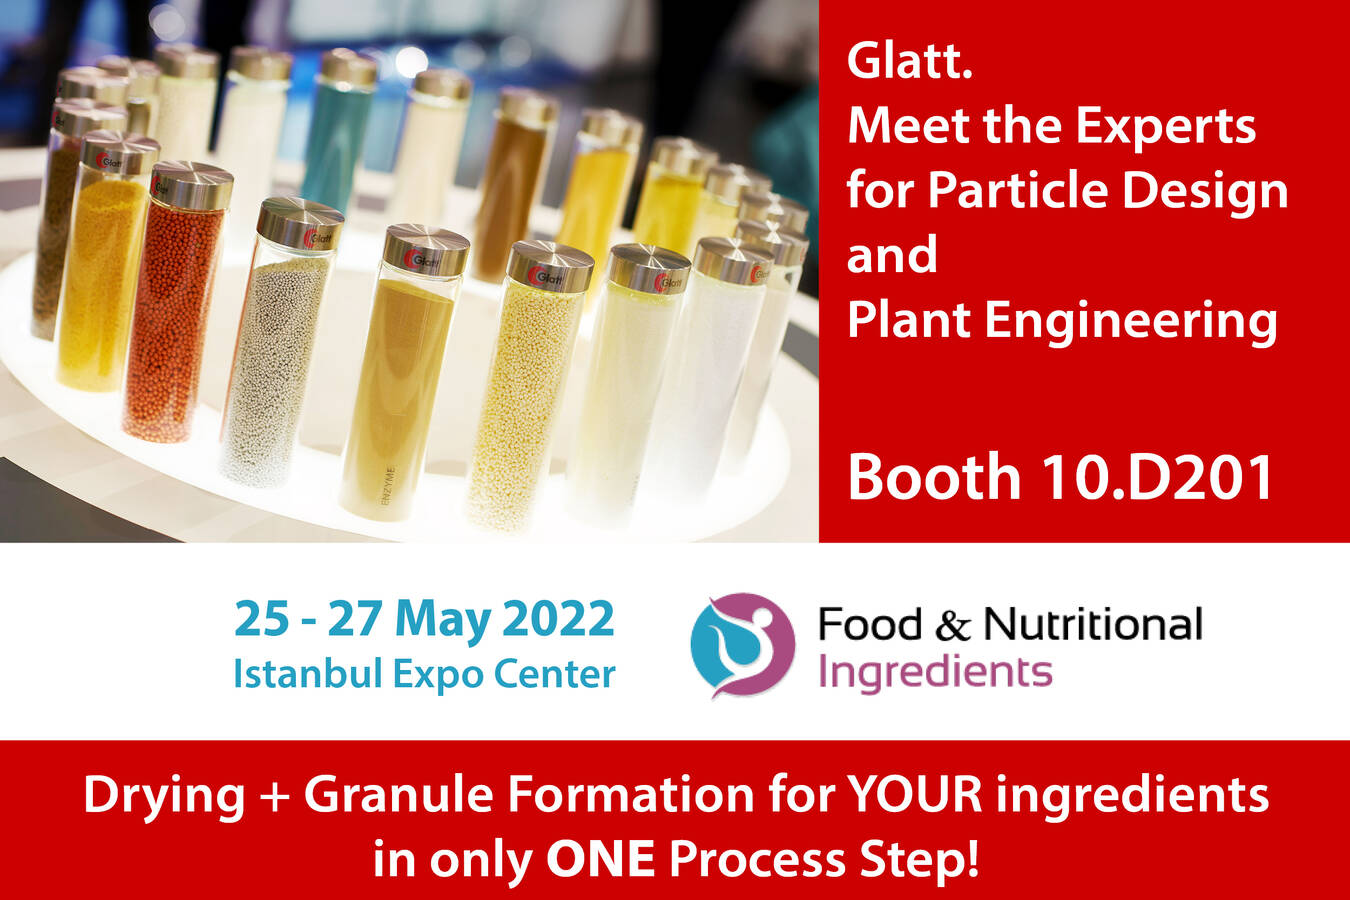 Glatt @ Food & Nutritional Ingredients 2022, Istanbul  particle design, process engineering and plant engineering in hall 10 at booth D201